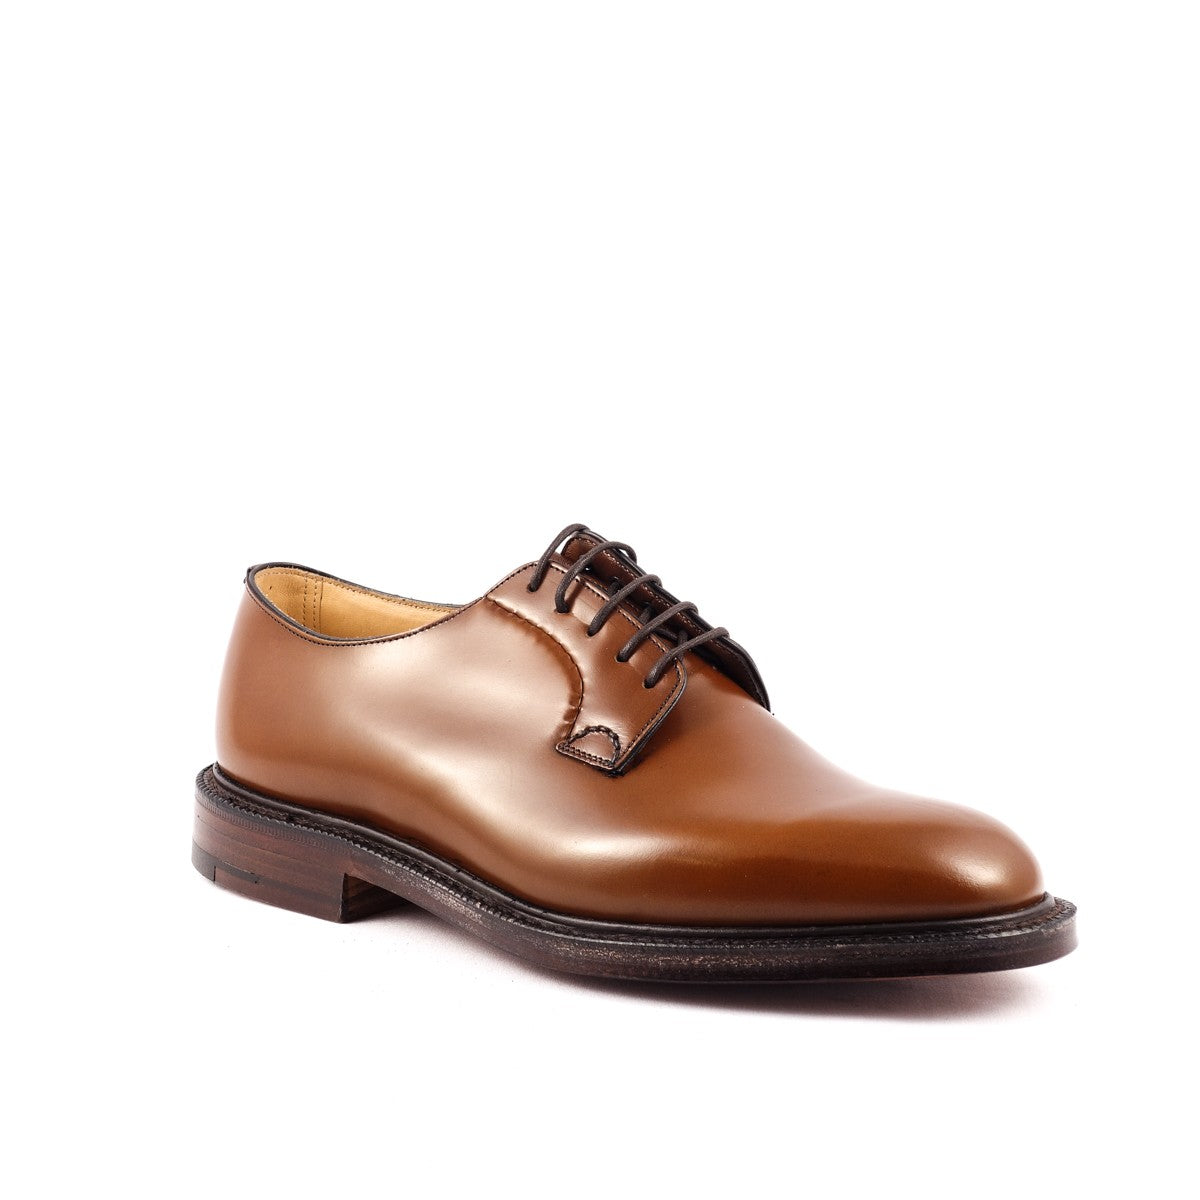 Church's Shannon derby lace-up in tan-colored brushed leather